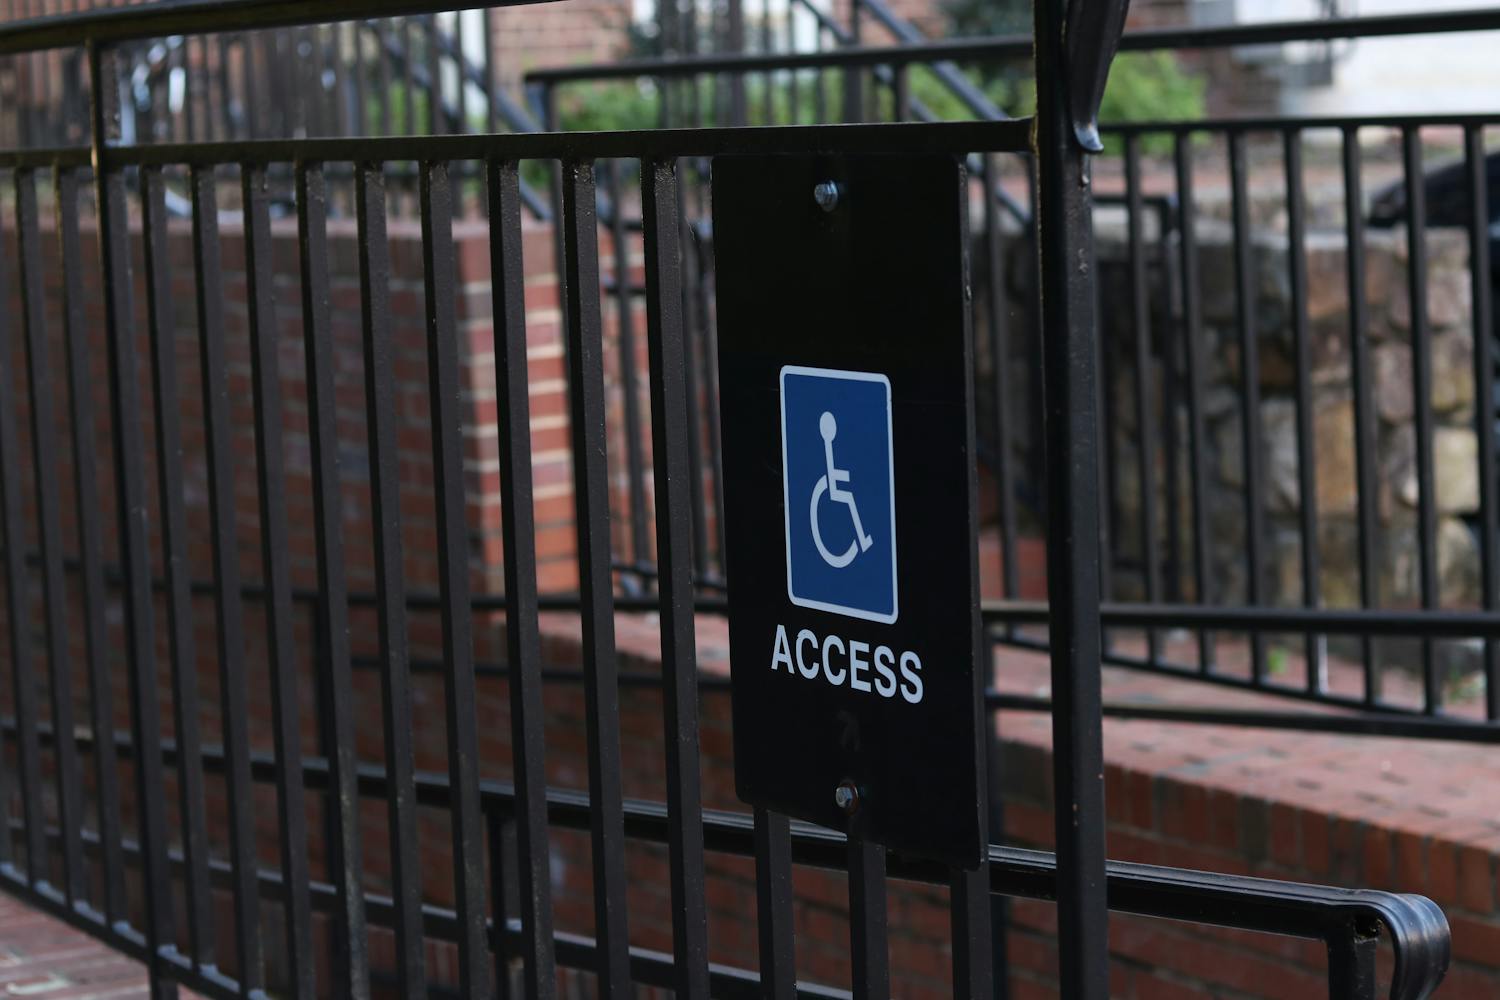 The rescinding of disability guidelines could affect UNC student users of accessibility services.